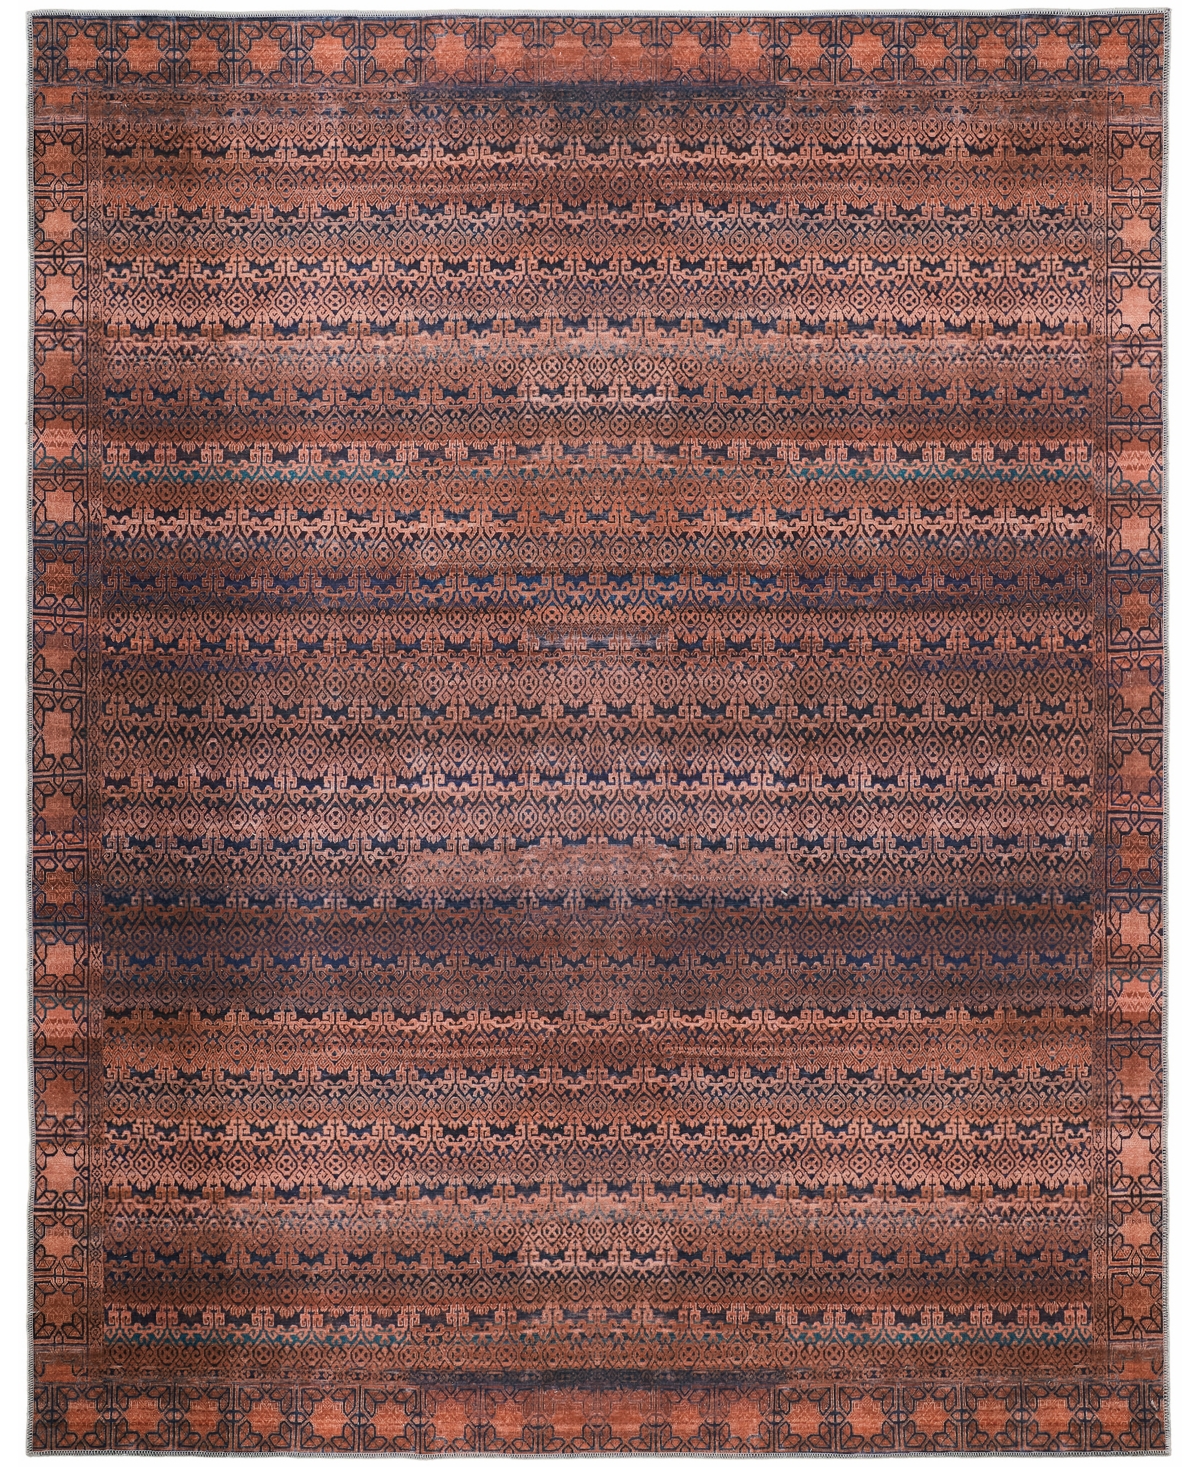 Simply Woven Voss F39h4 7'10" X 9'10" Area Rug In Tan,blue